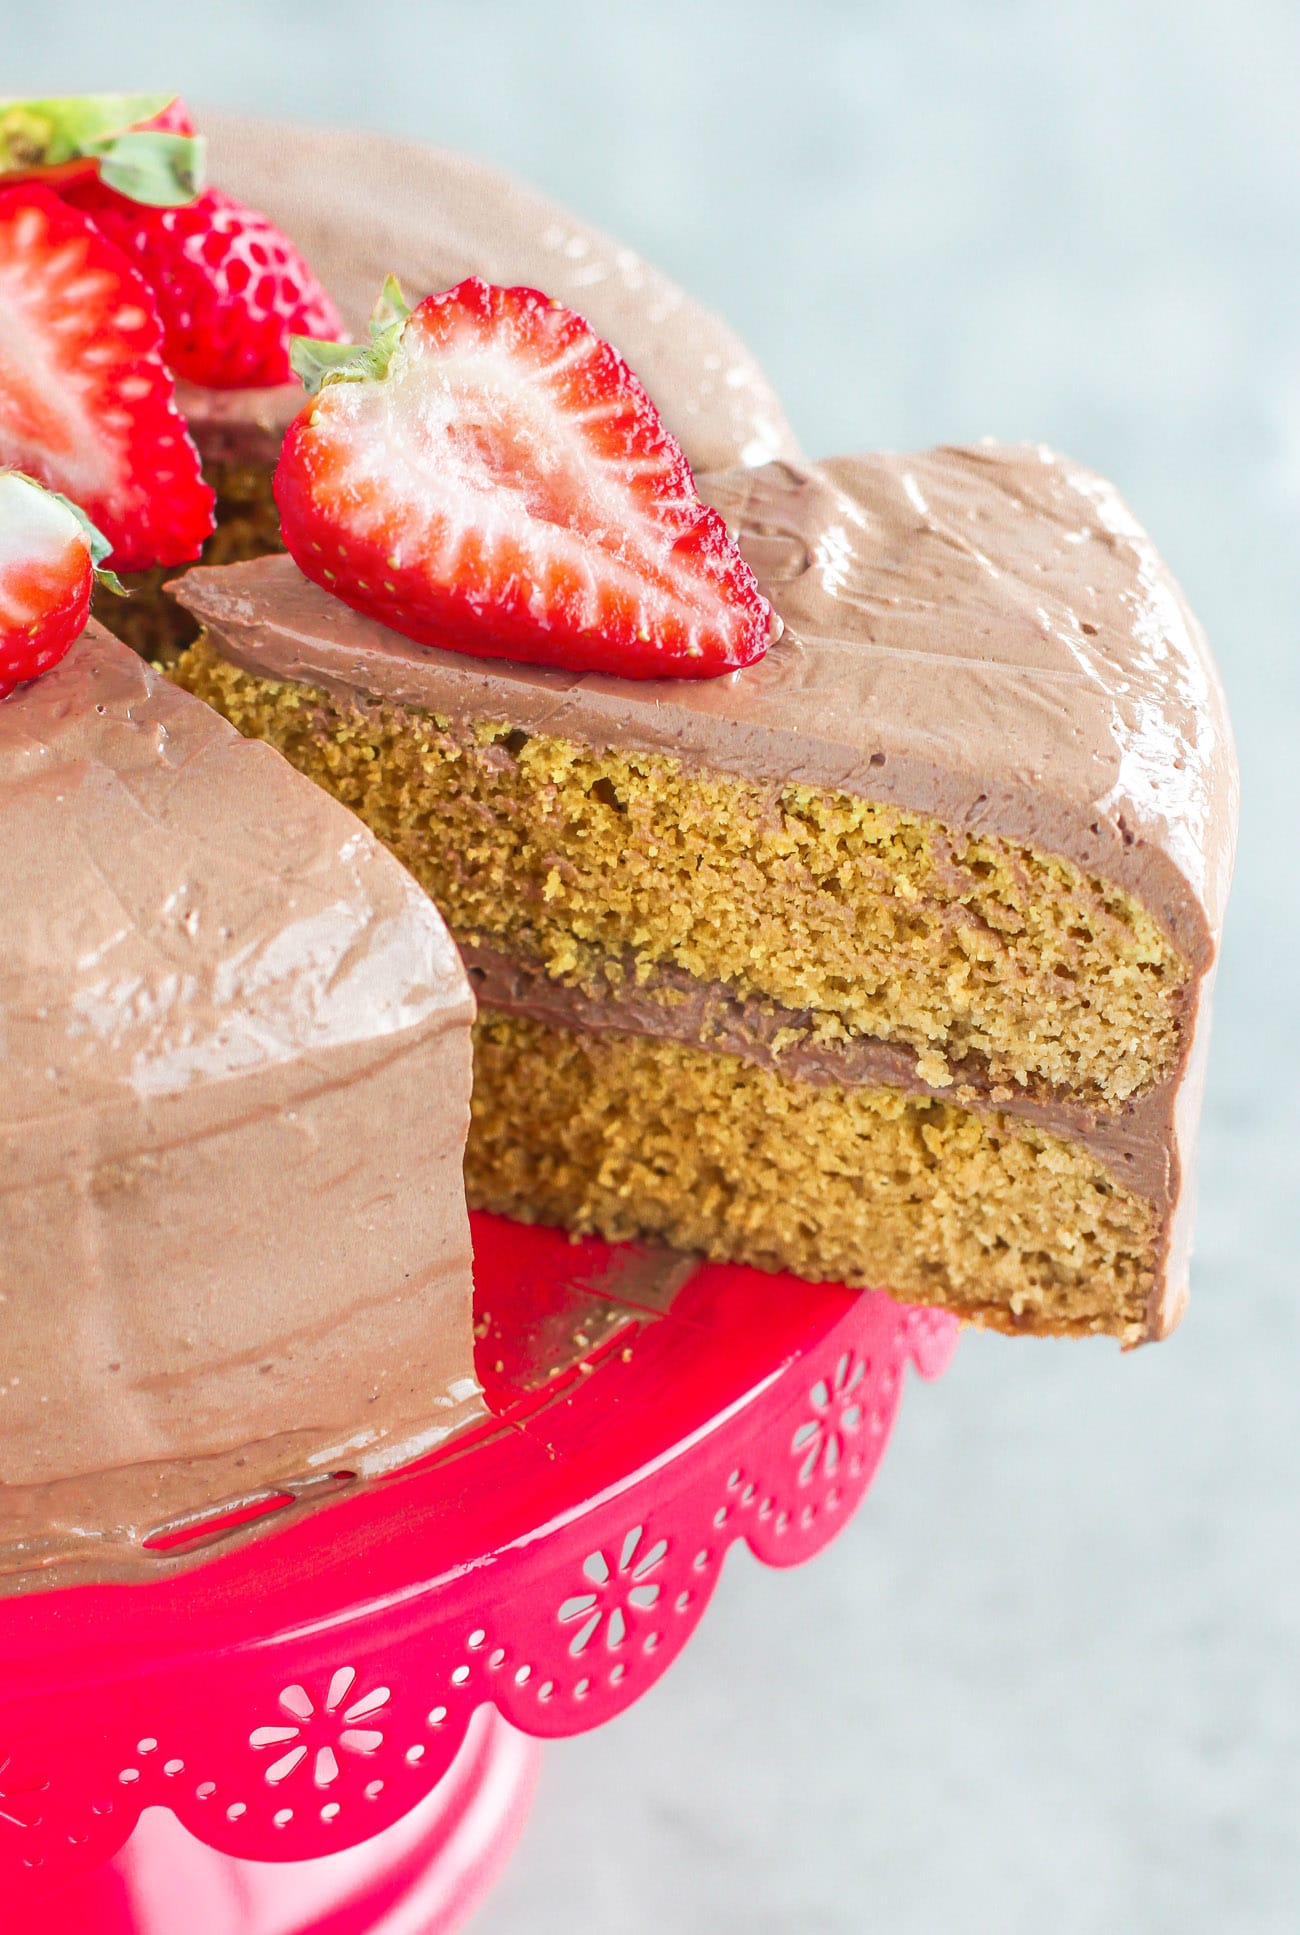 Healthy Yellow Cake with Chocolate Frosting